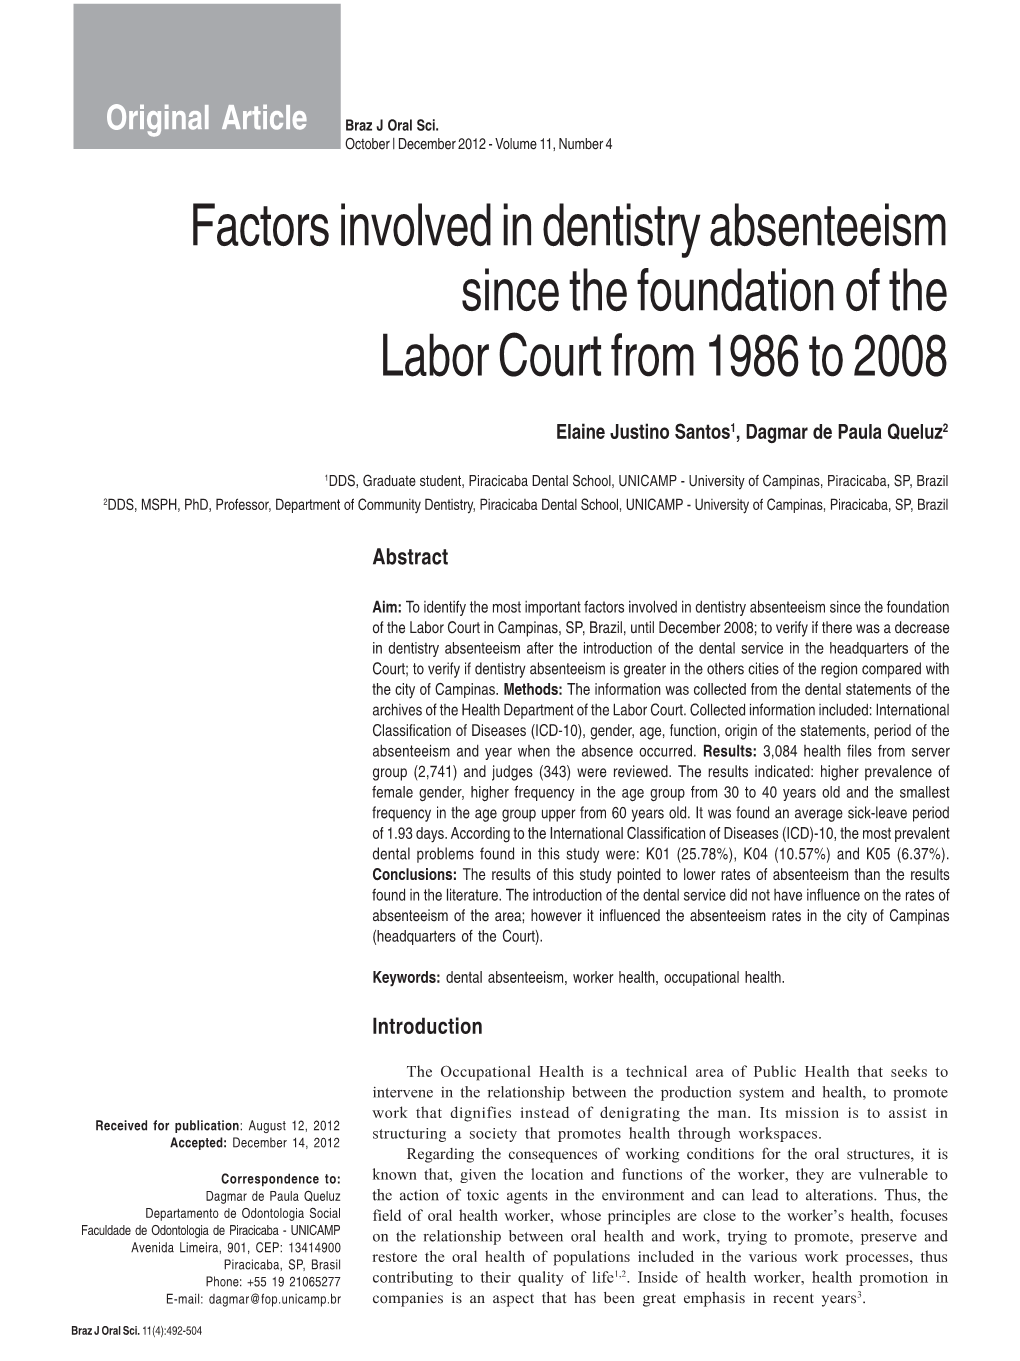 Factors Involved in Dentistry Absenteeism Since the Foundation of the Labor Court from 1986 to 2008